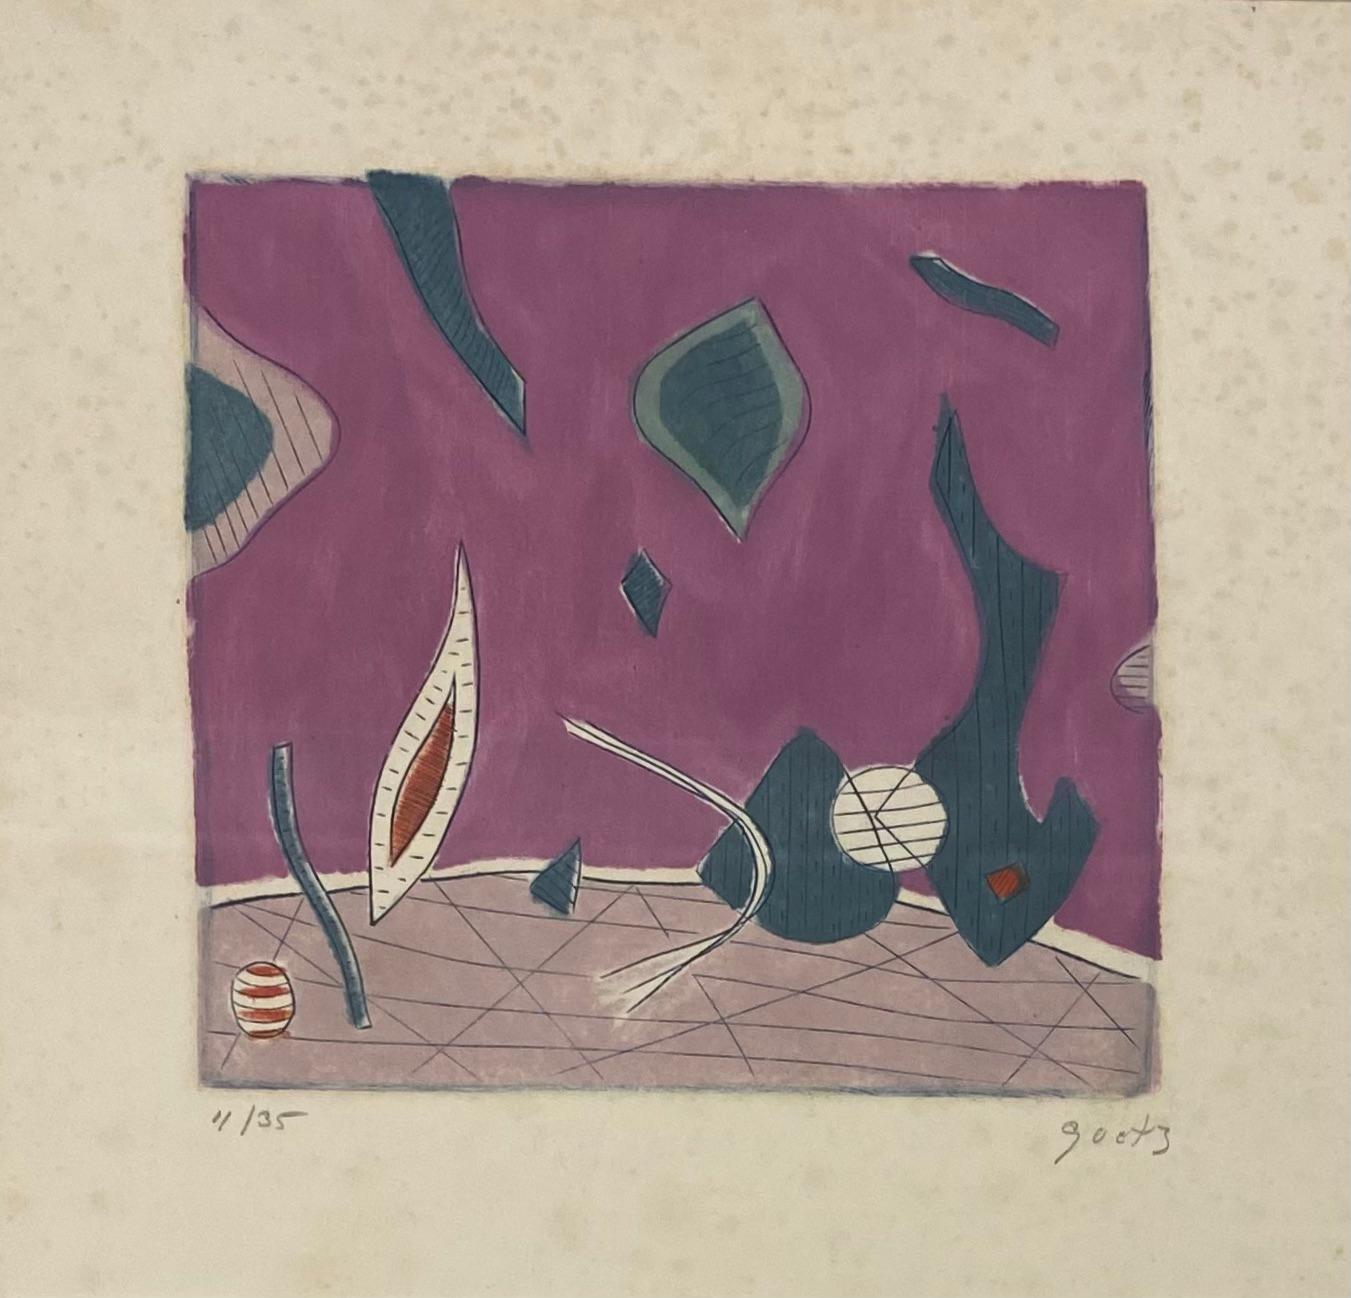 Original limited edition lithograph by Henri Bernard Goetz, number 11/35. 

Henri Bernard Goetz (September 29, 1909-August 12, 1989) was a French American Surrealist painter and engraver. He is known for his artwork, as well as for inventing the